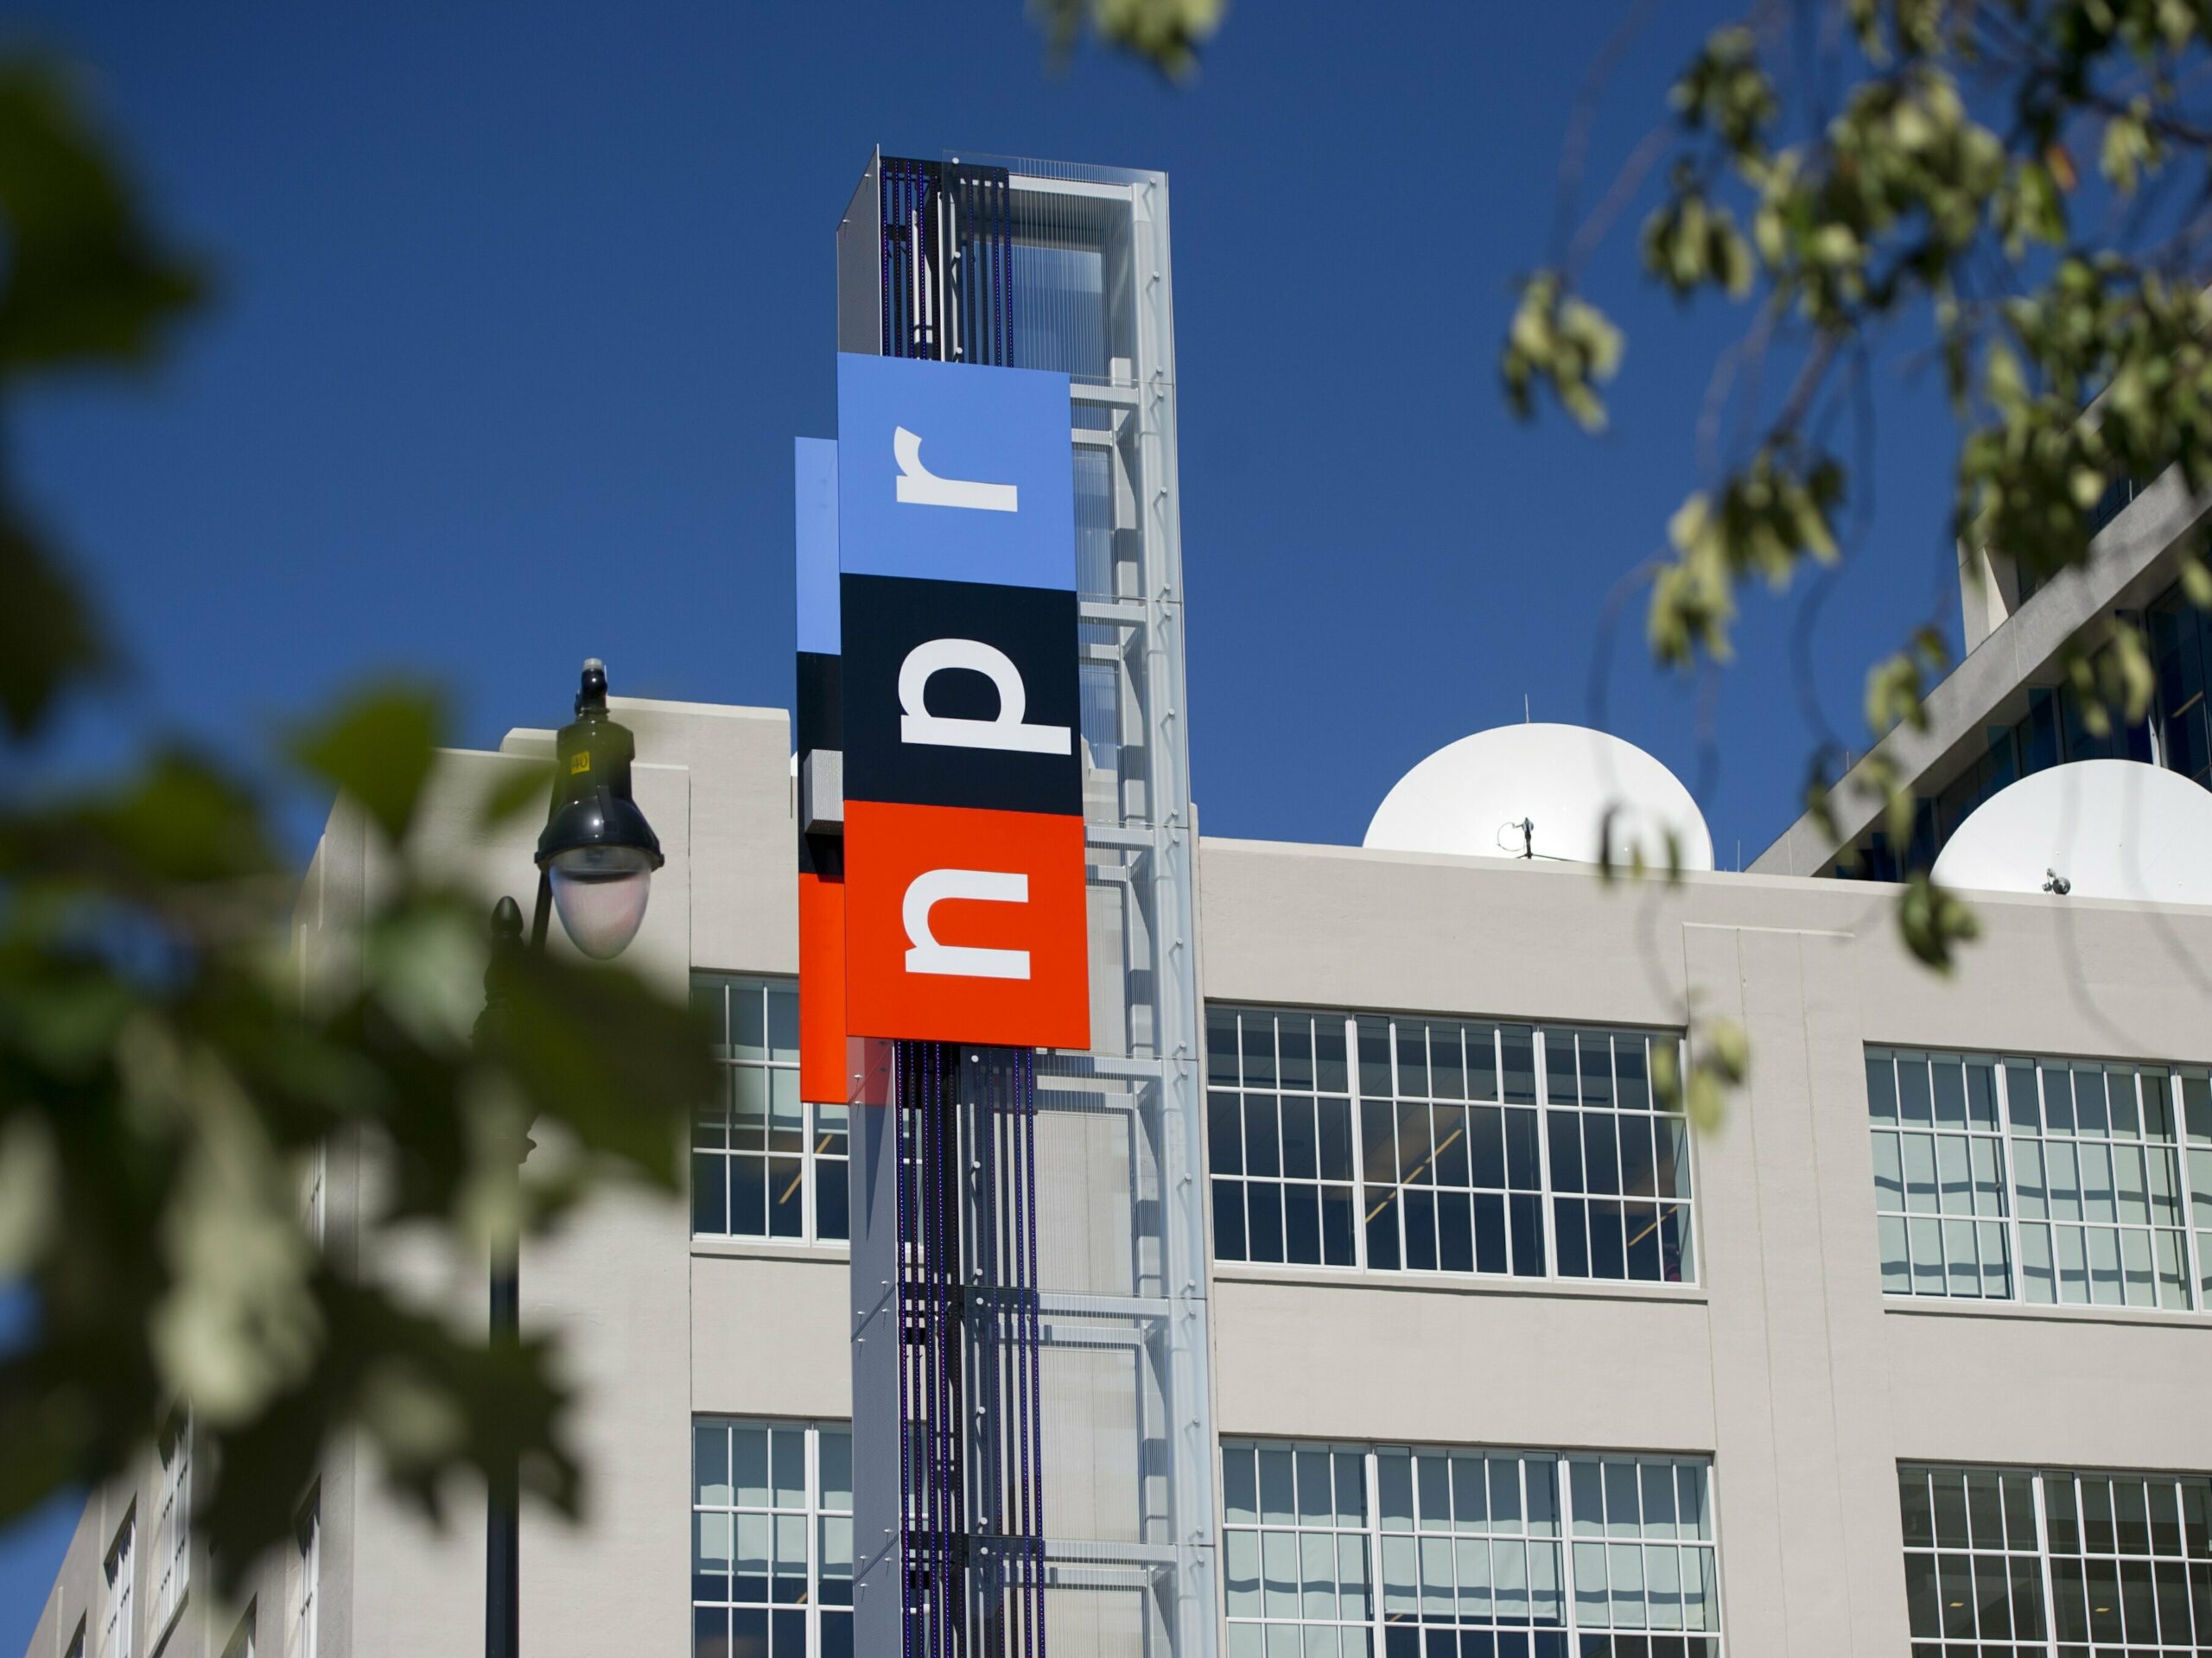 NPR defends its journalism after senior editor says it has lost the public’s trust